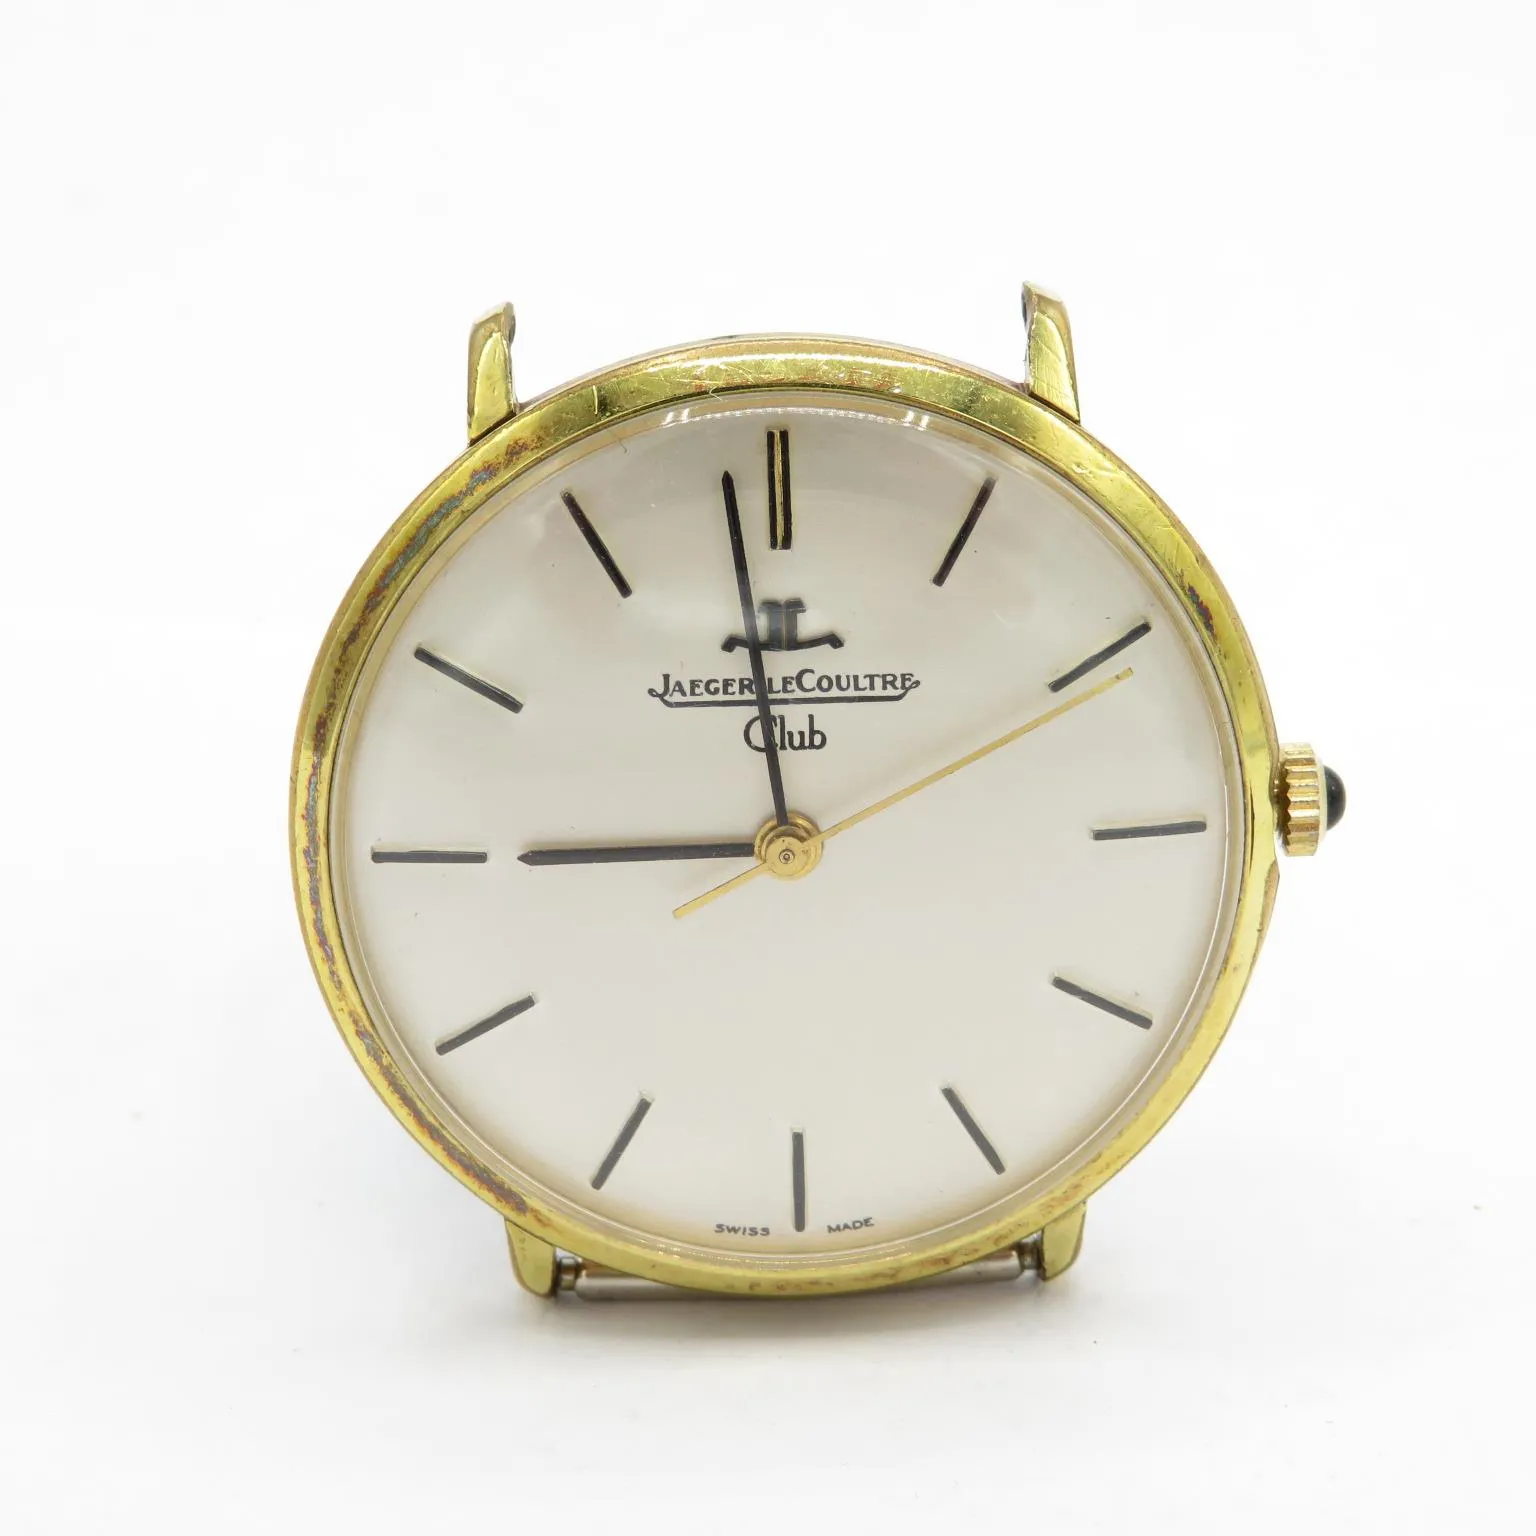 Jaeger-LeCoultre Club nullmm Gold-plated